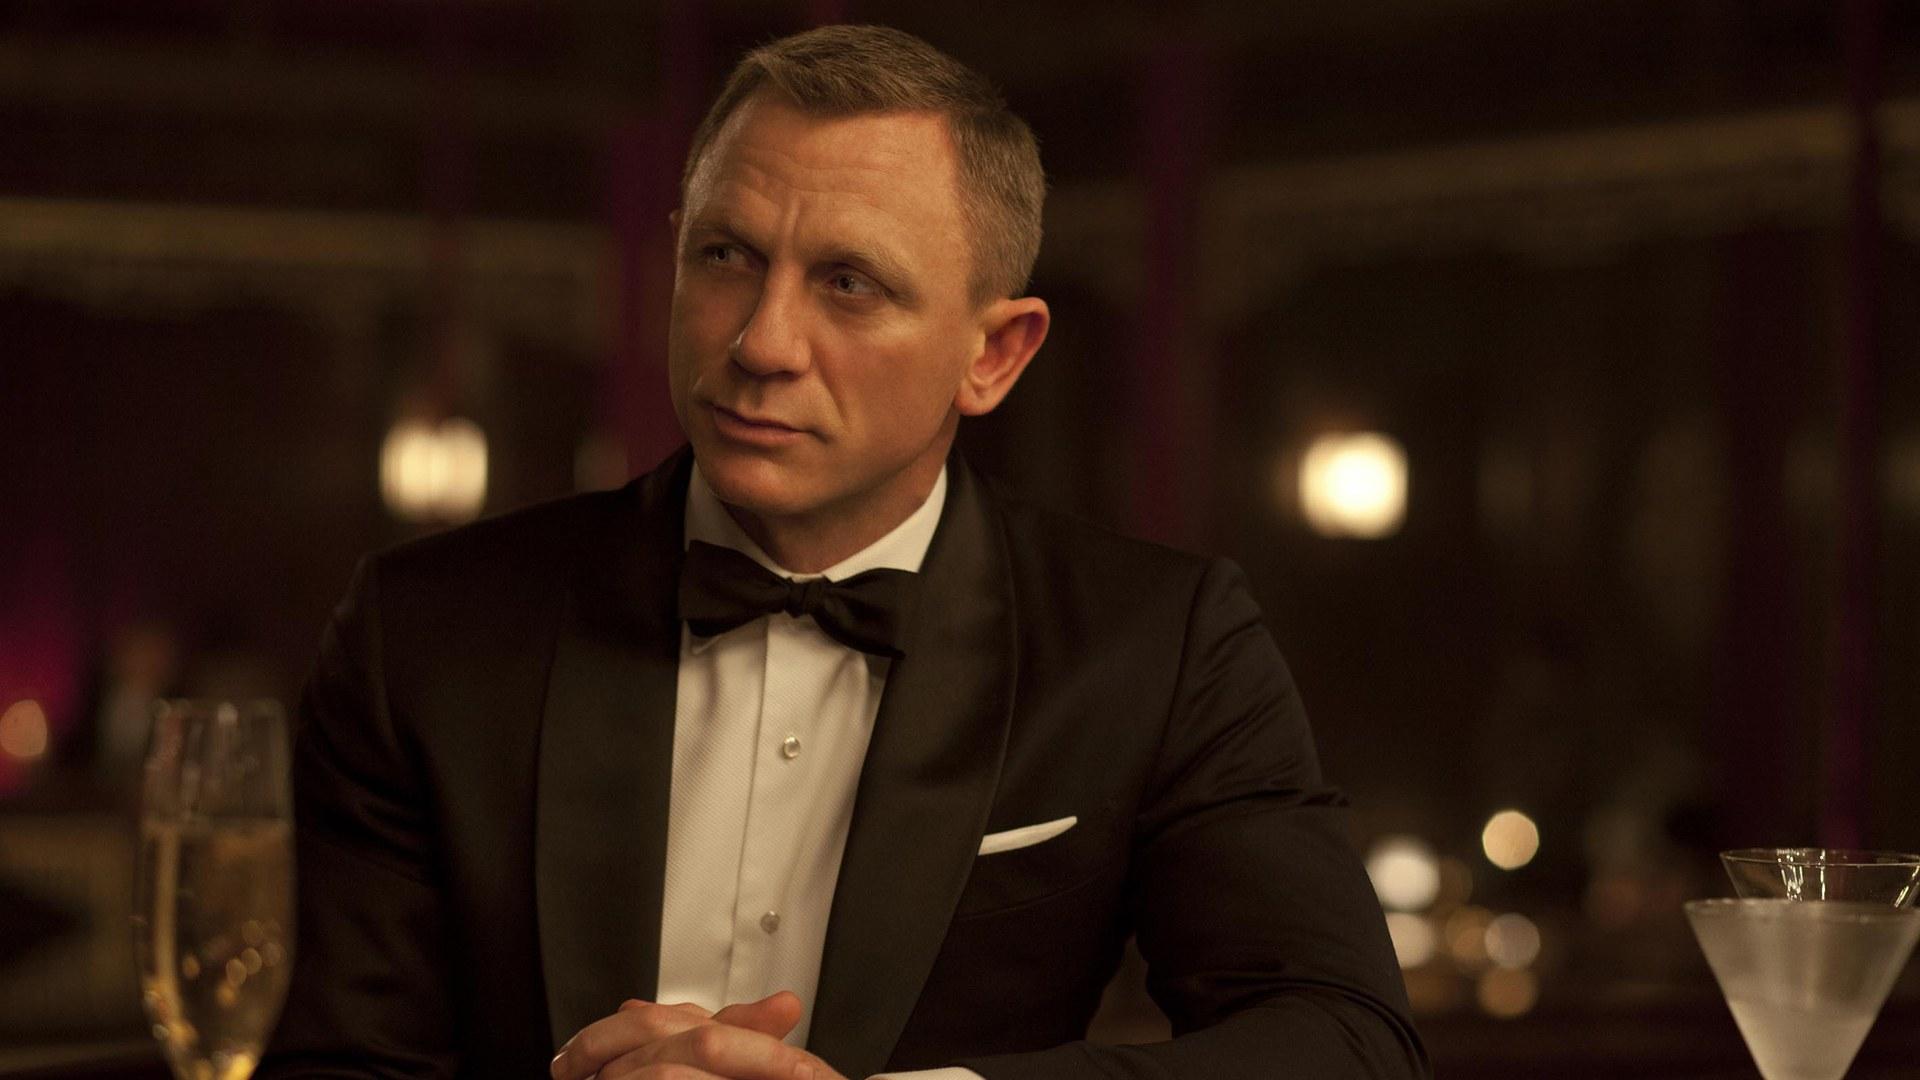 Our First Look At James Bond's No Time To Die And More